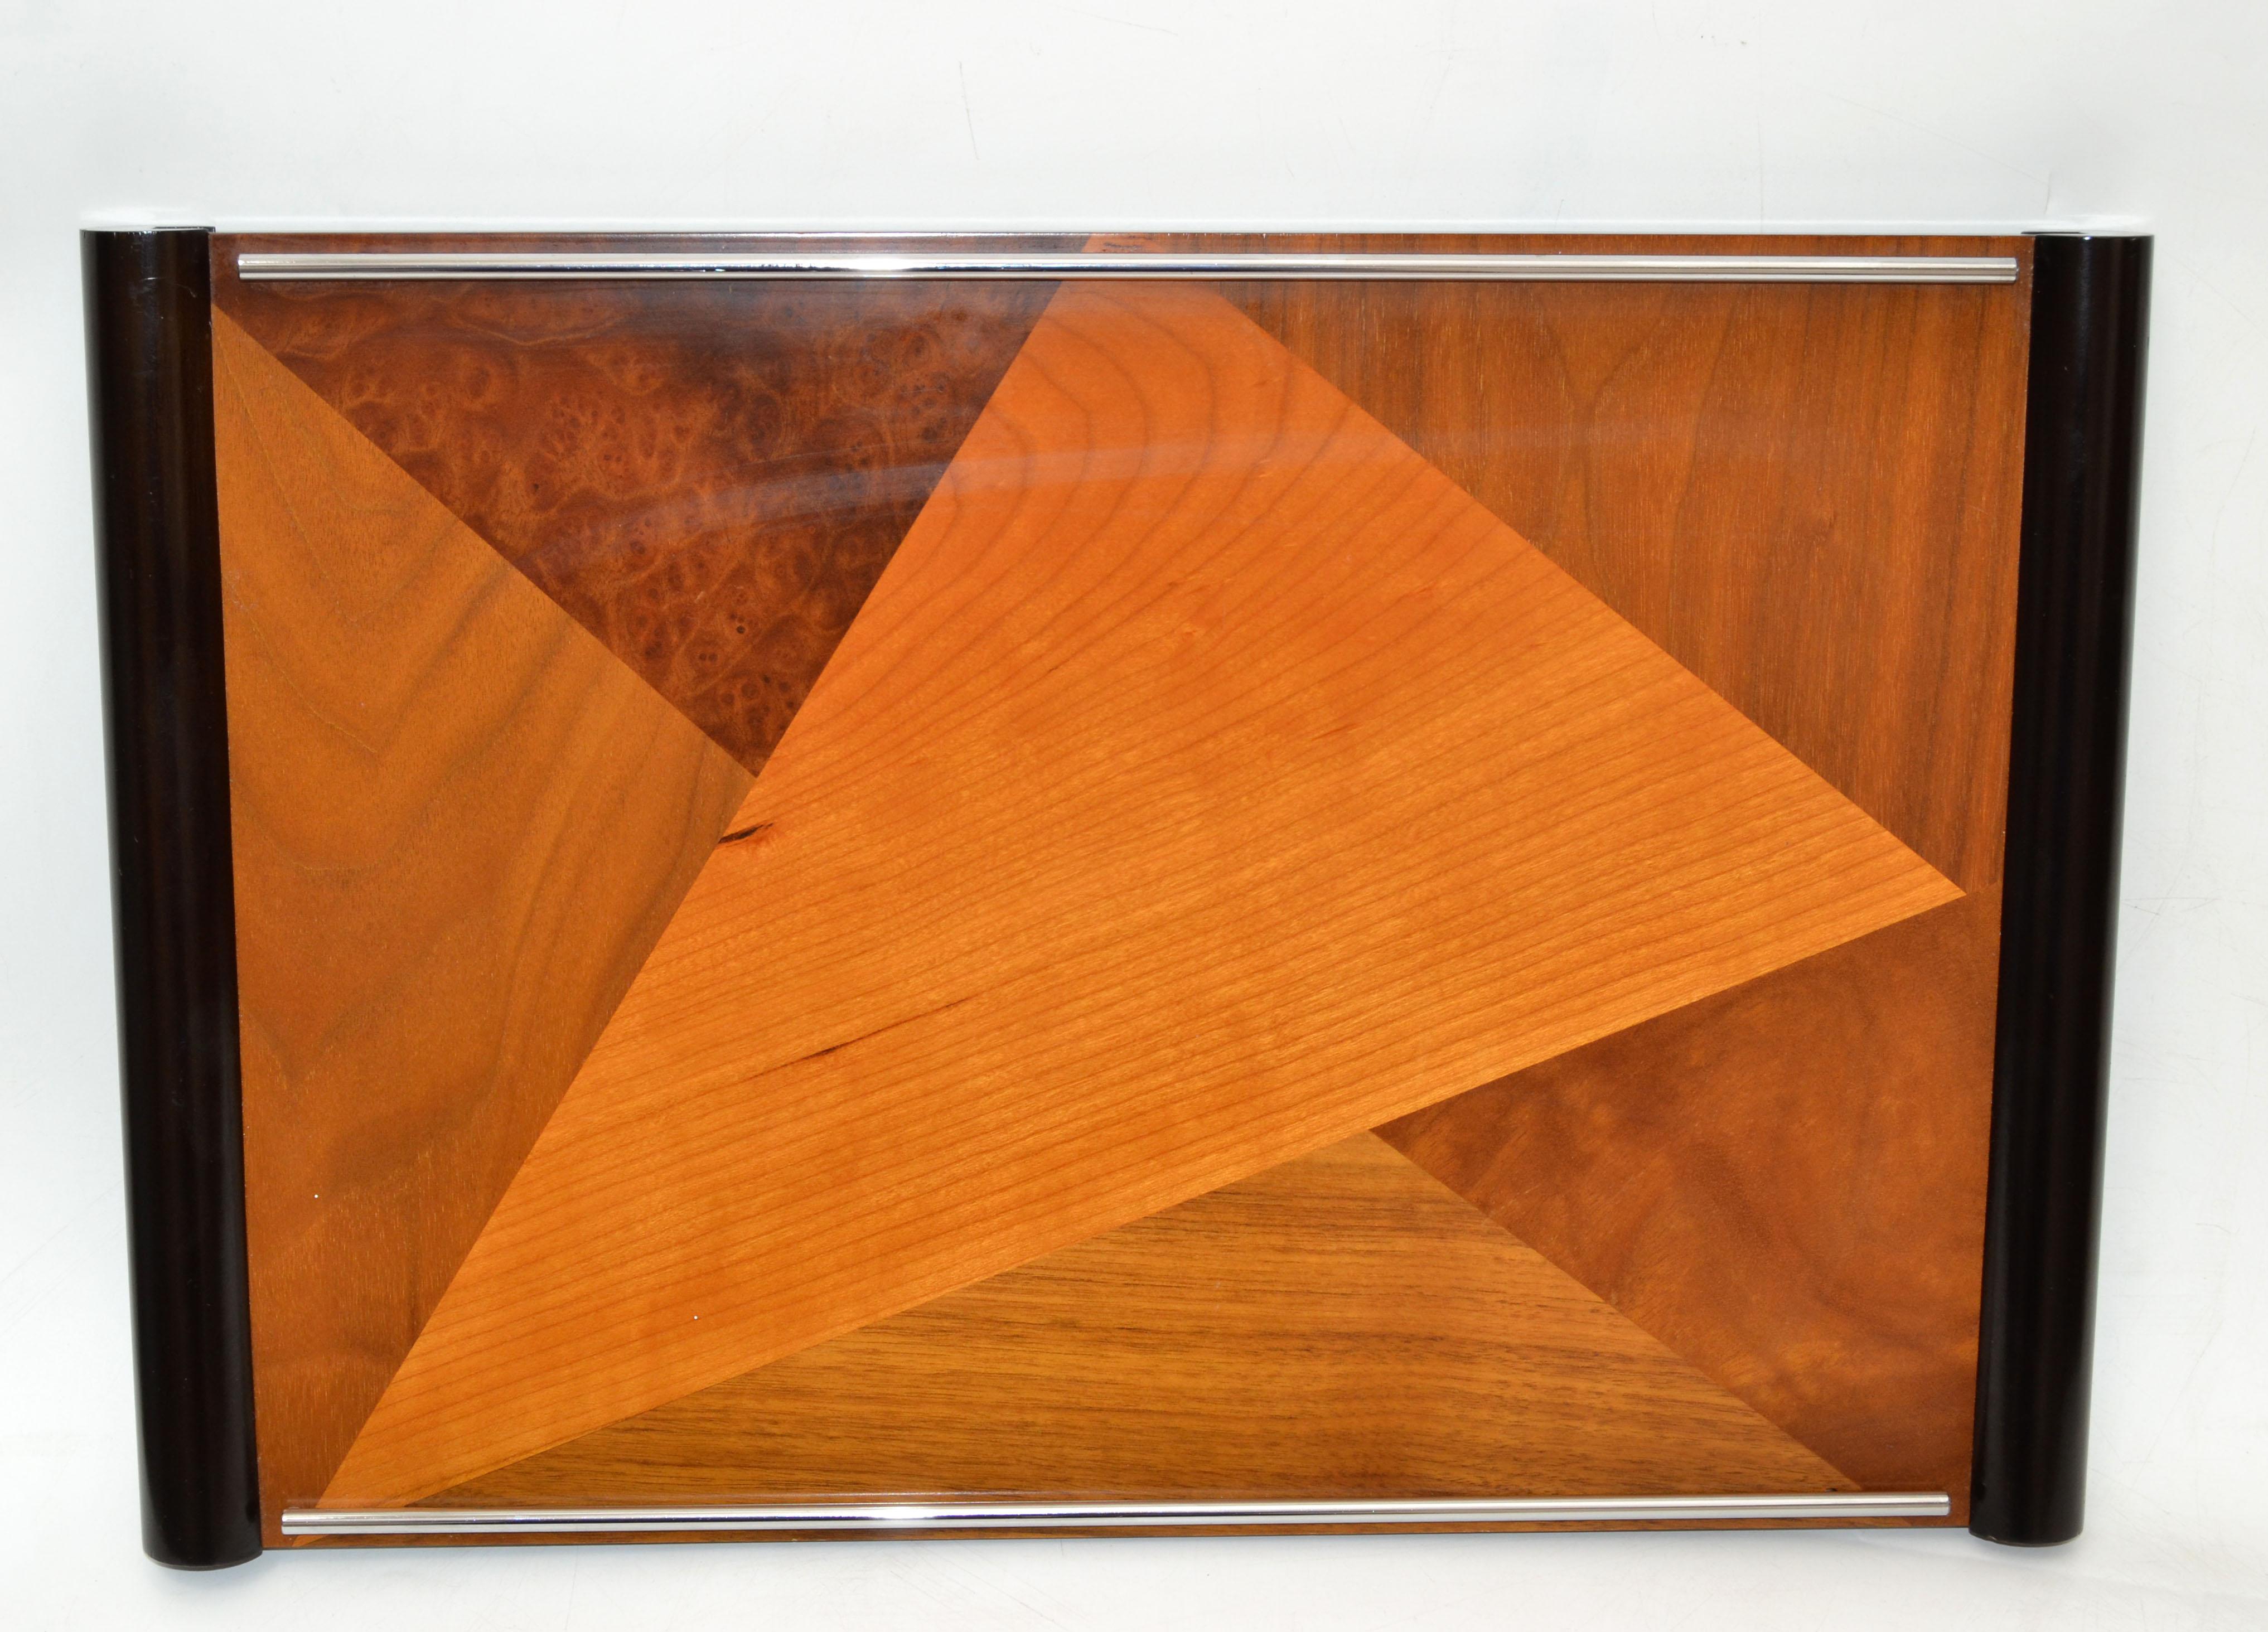 American organic modern handcrafted Marquetry hardwood & Chrome decorative serving tray or centerpiece with a finish.
Note the beautiful wood grain.

